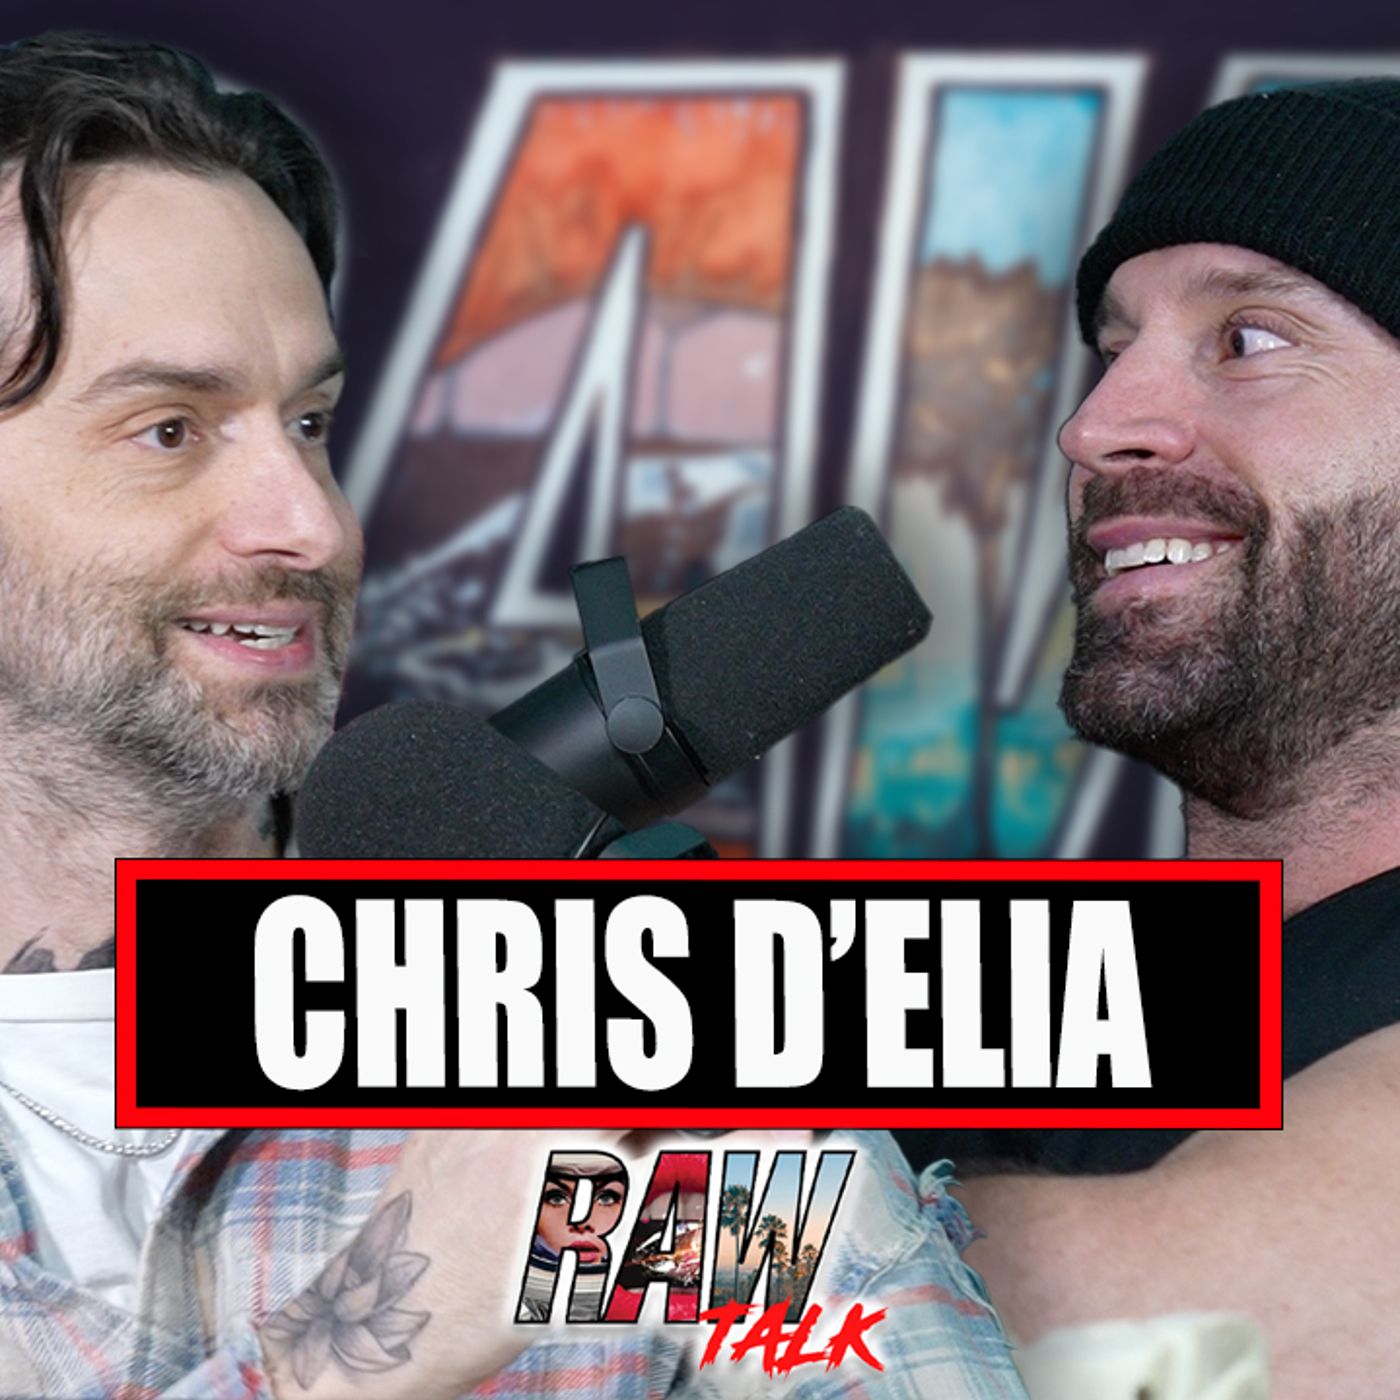 The worst thing Chris D’Elia did